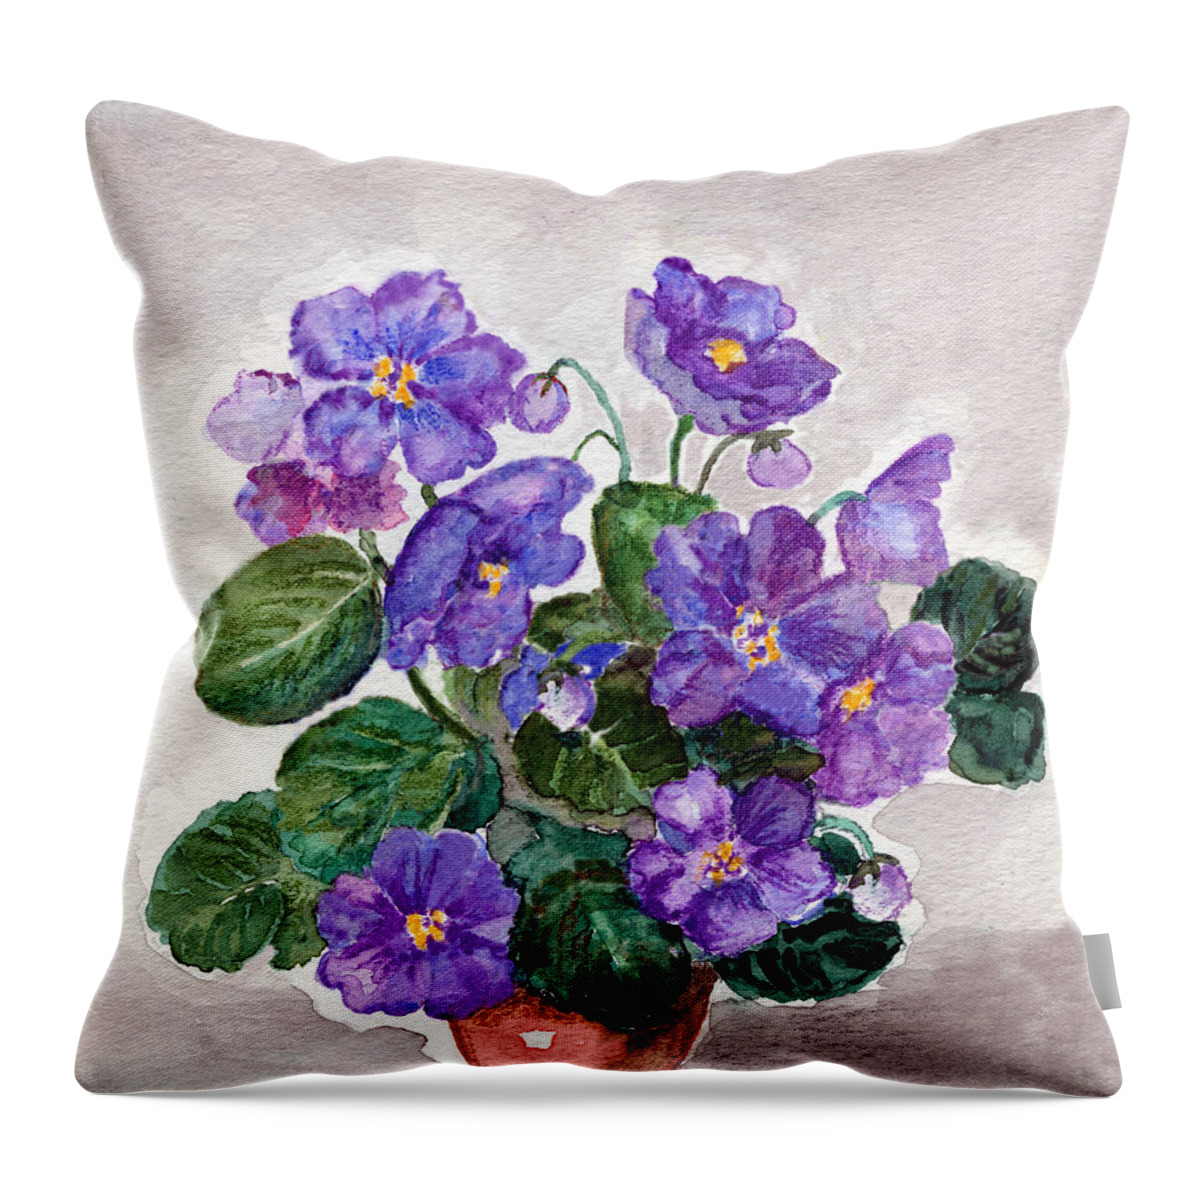 Watercolor Painting Throw Pillow featuring the digital art Watercolor Painting Of  African Violet by Mitza